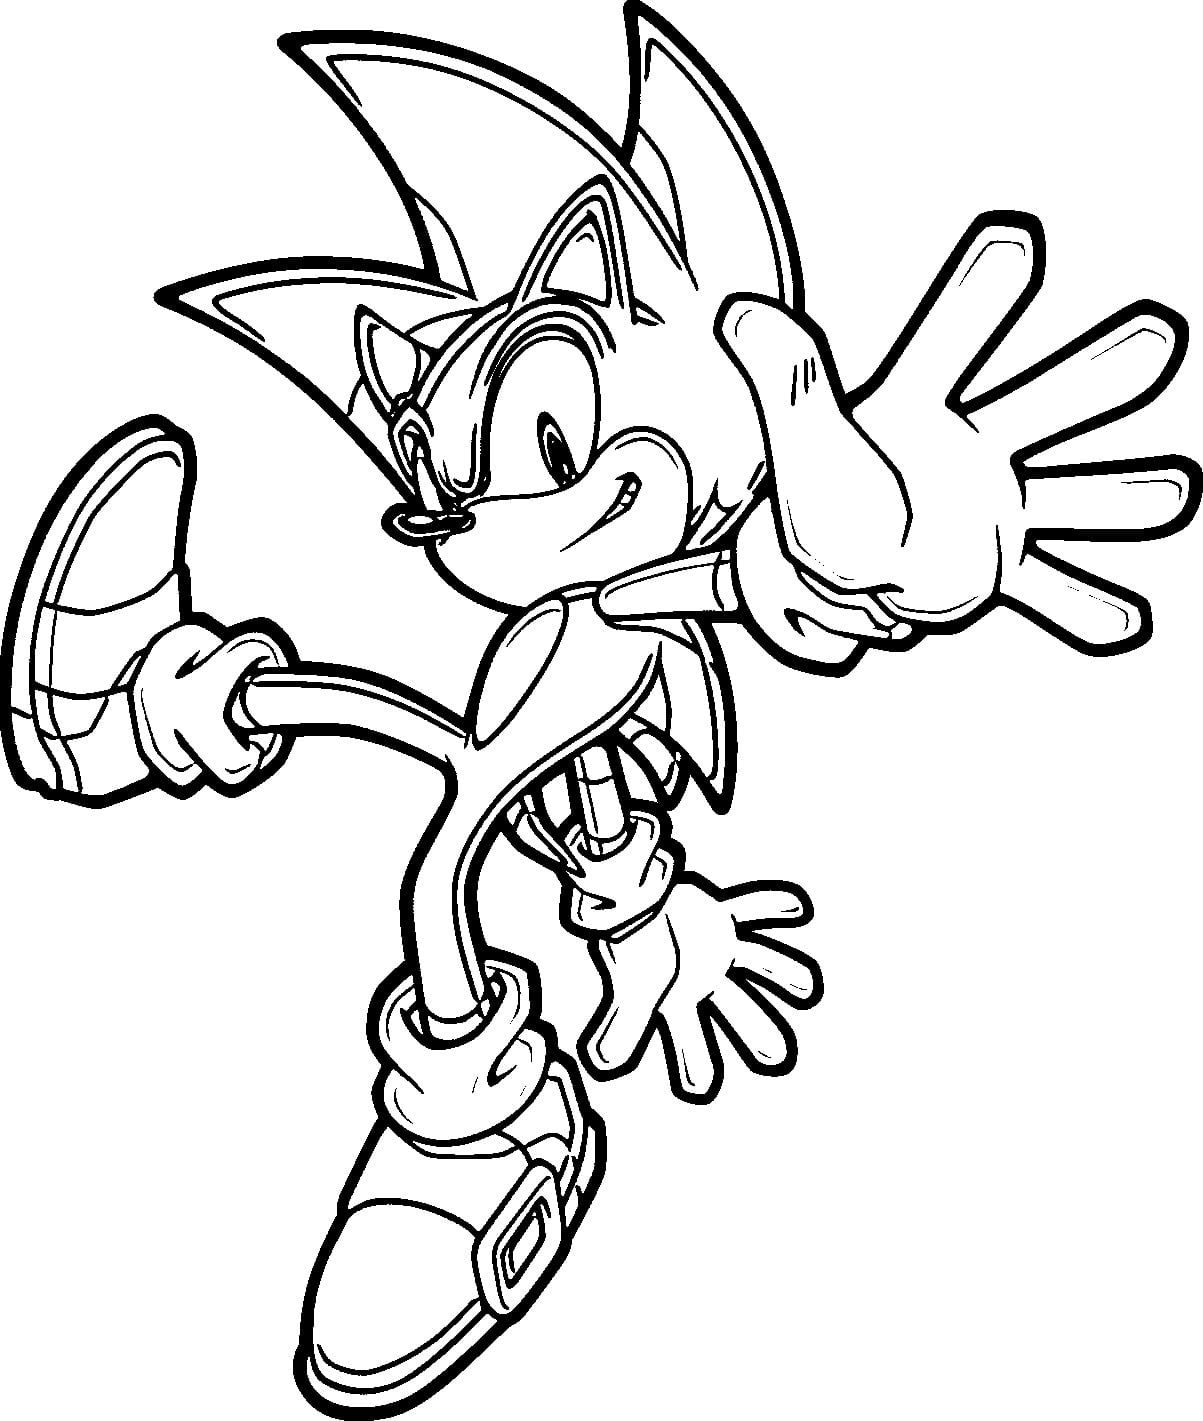 Simple Sonic the Hedgehog coloring page